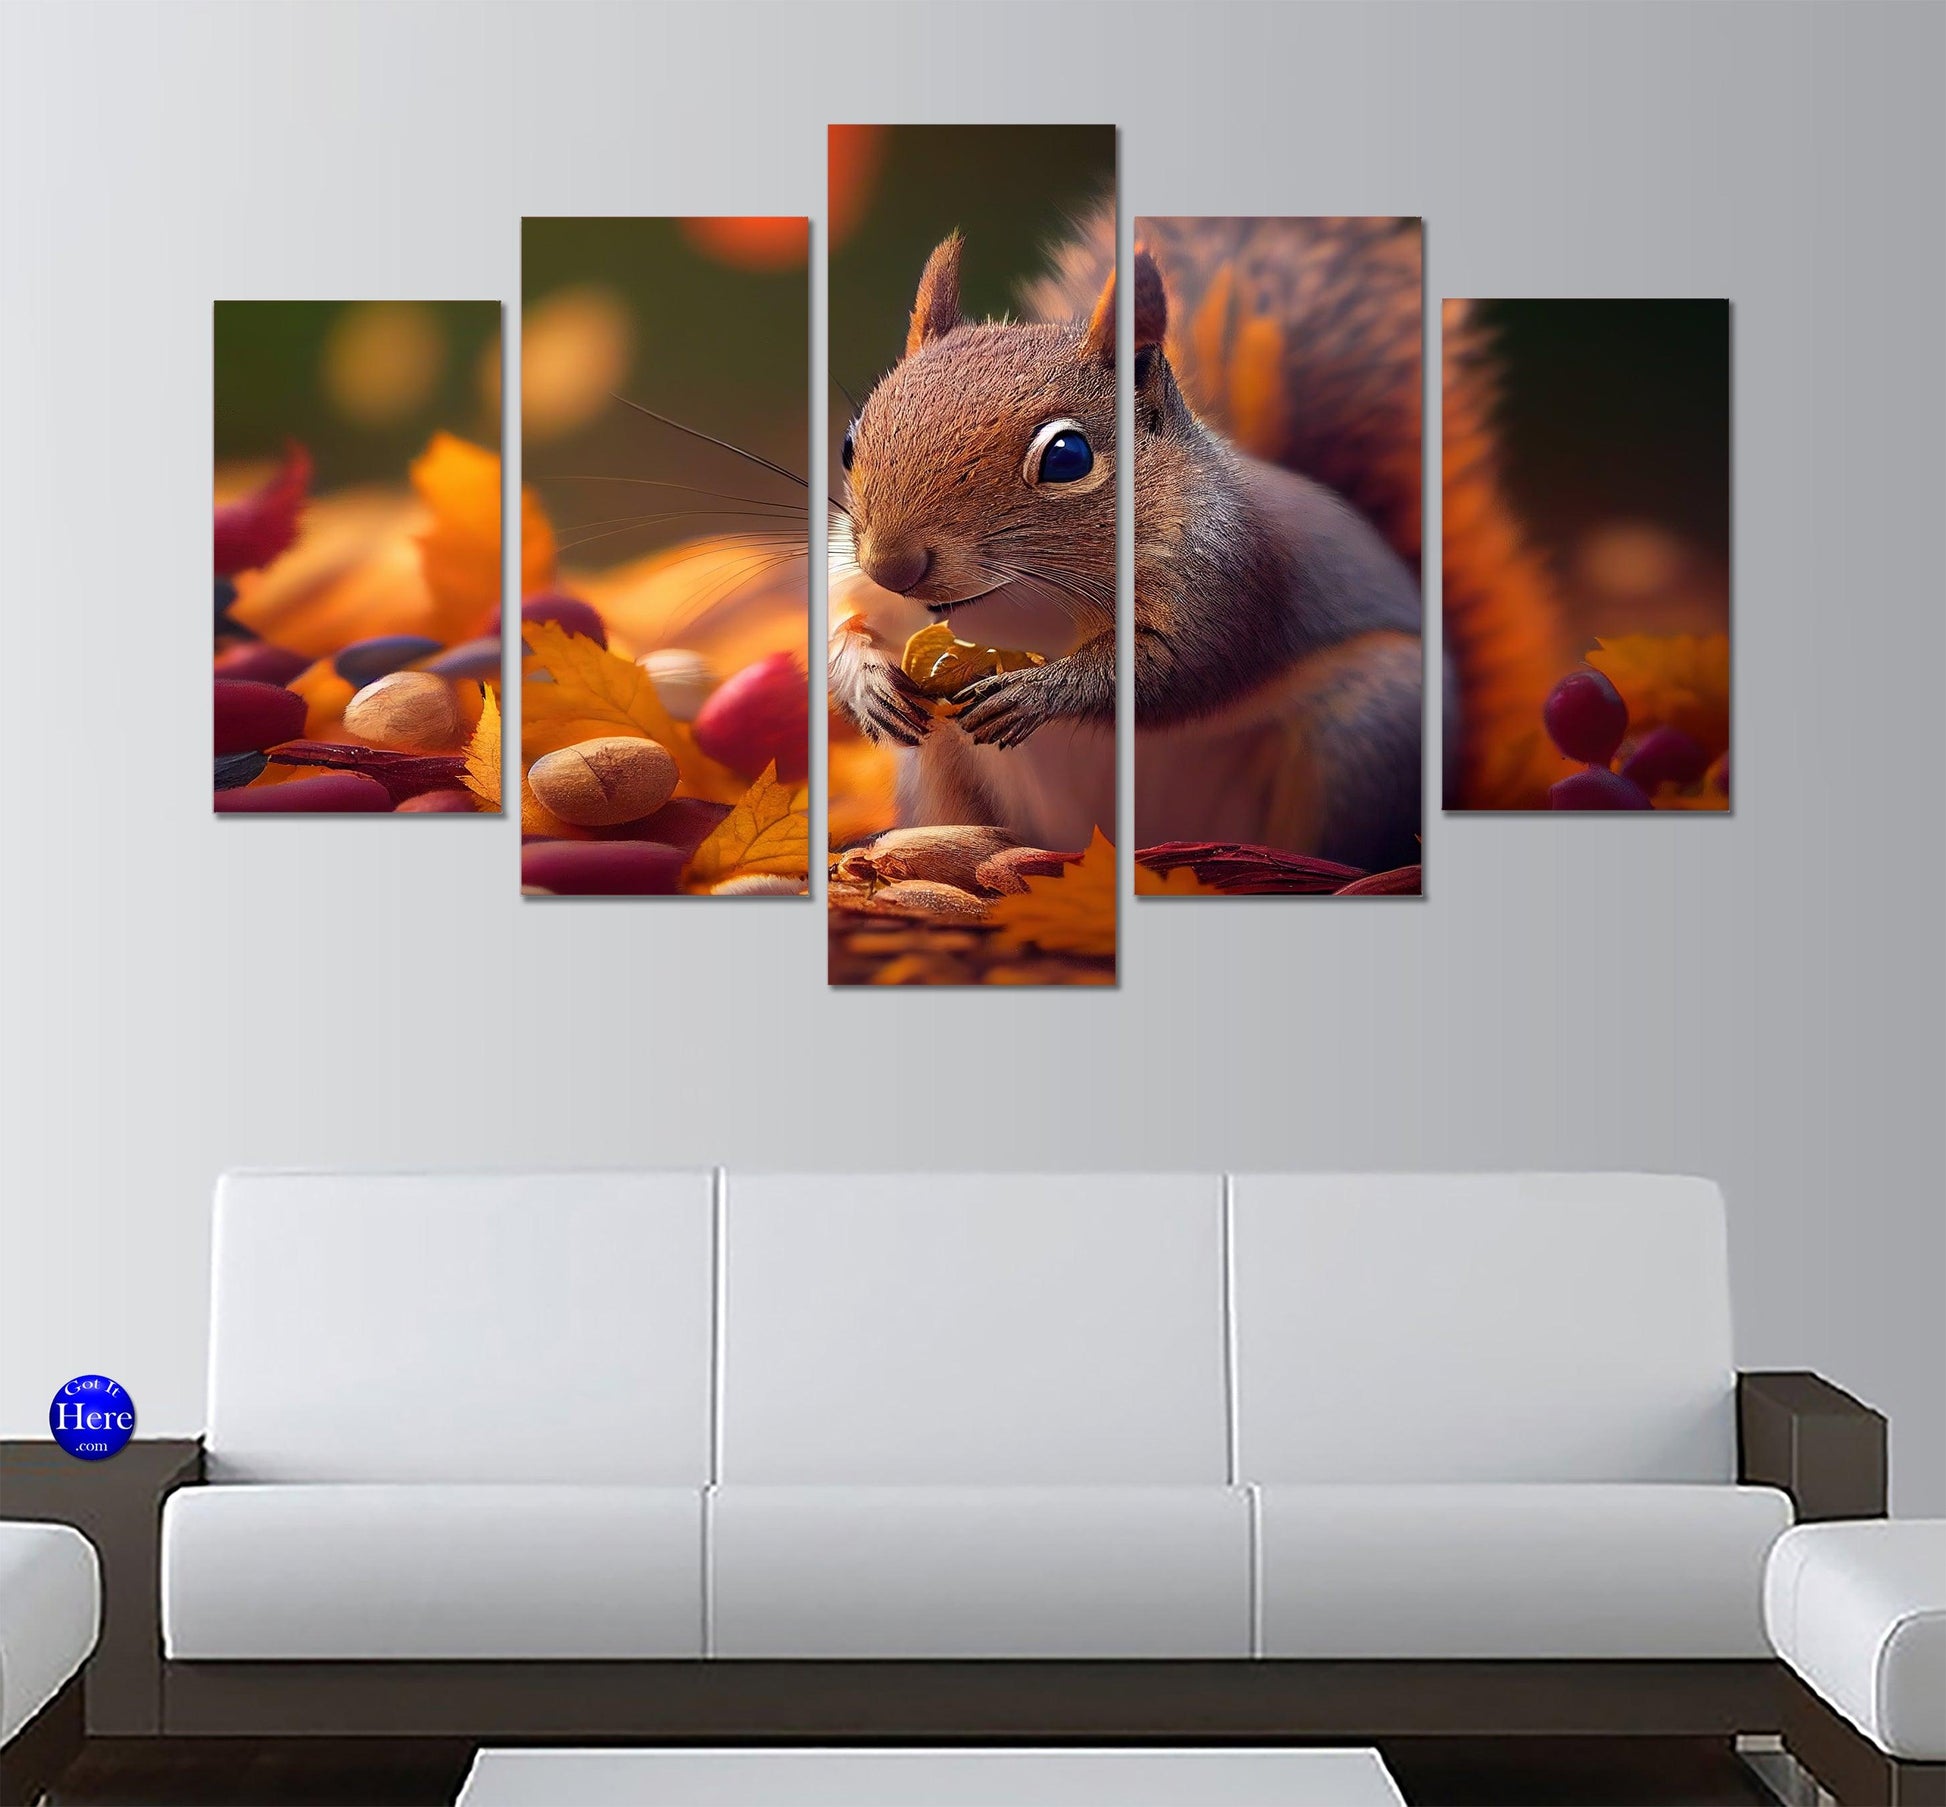 Red Squirrel Illustration 5 Panel Canvas Print Wall Art - GotItHere.com